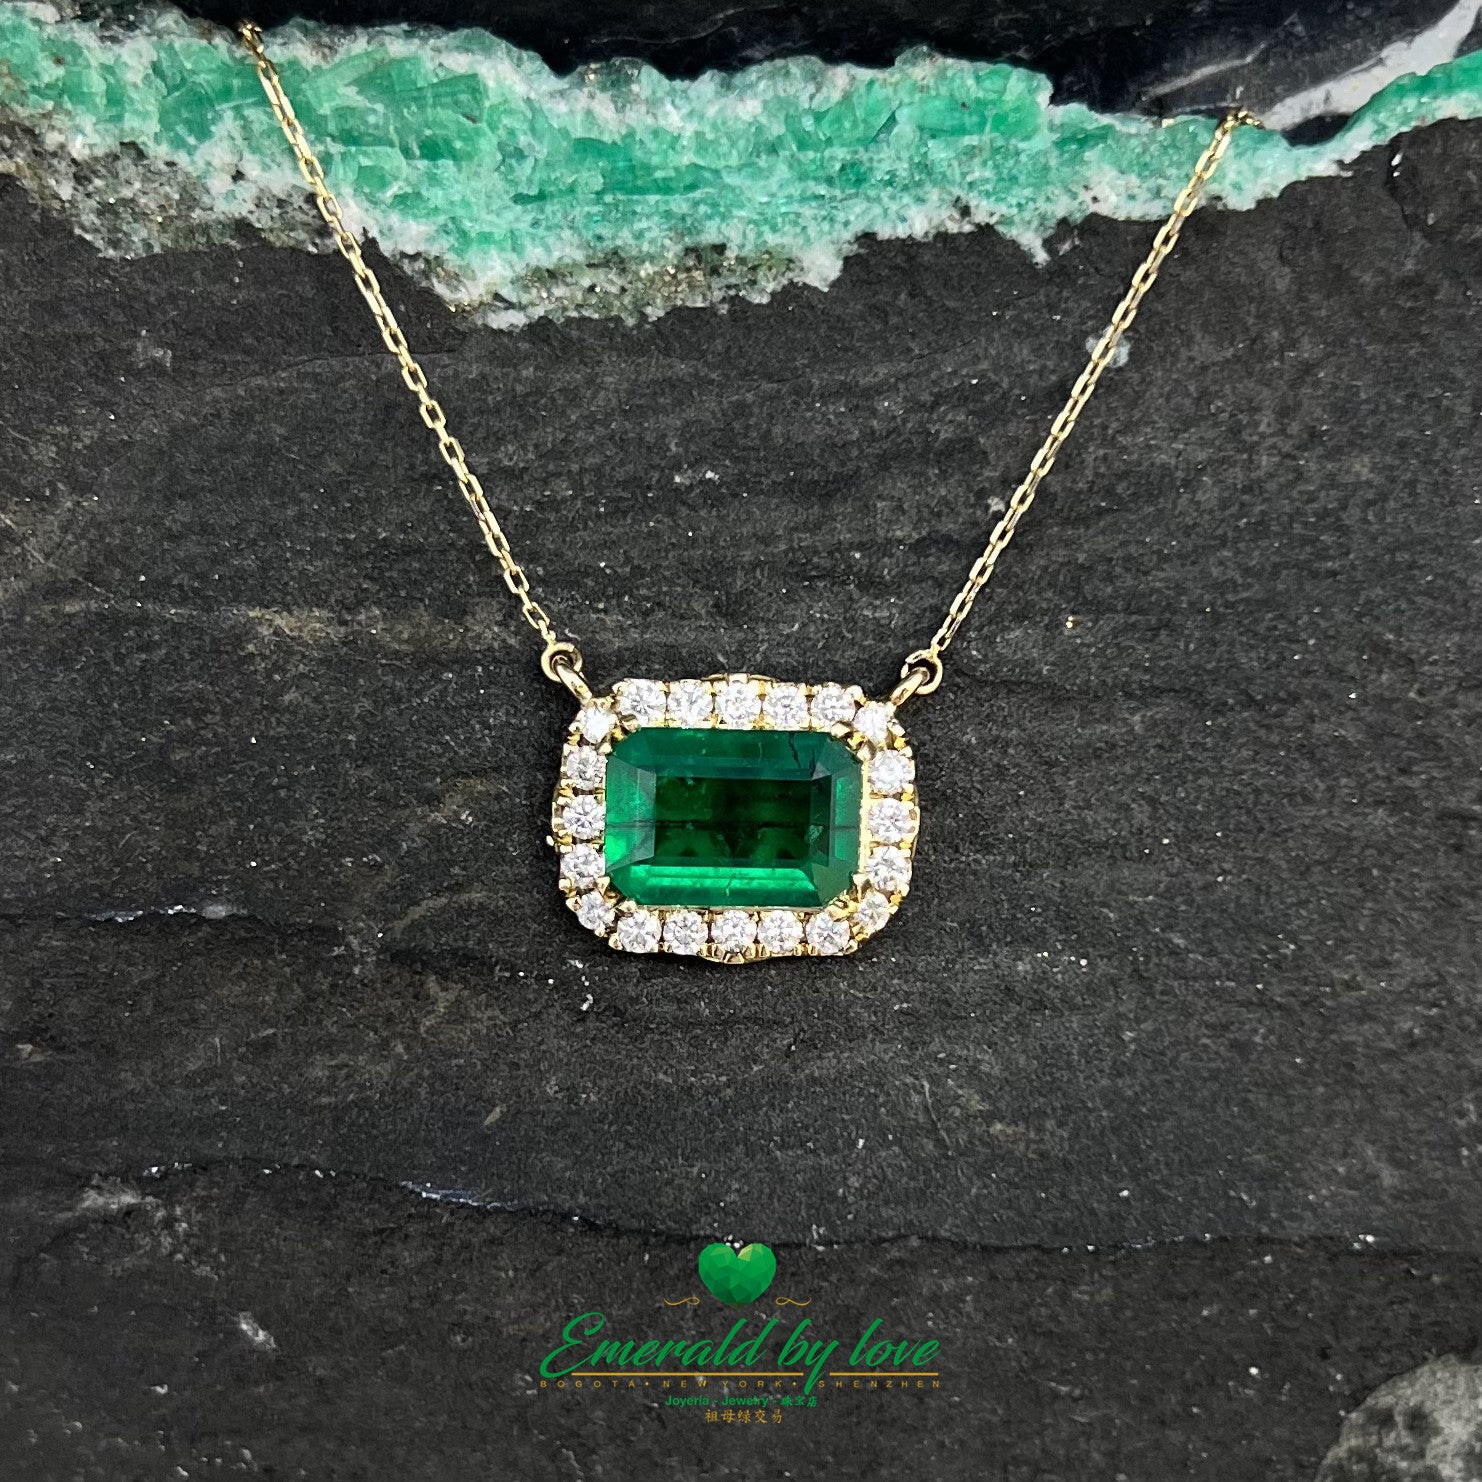 Stunning Yellow Gold Marquise Pendant with 1.85 Ct Emerald Cut Emerald and Diamond Halo